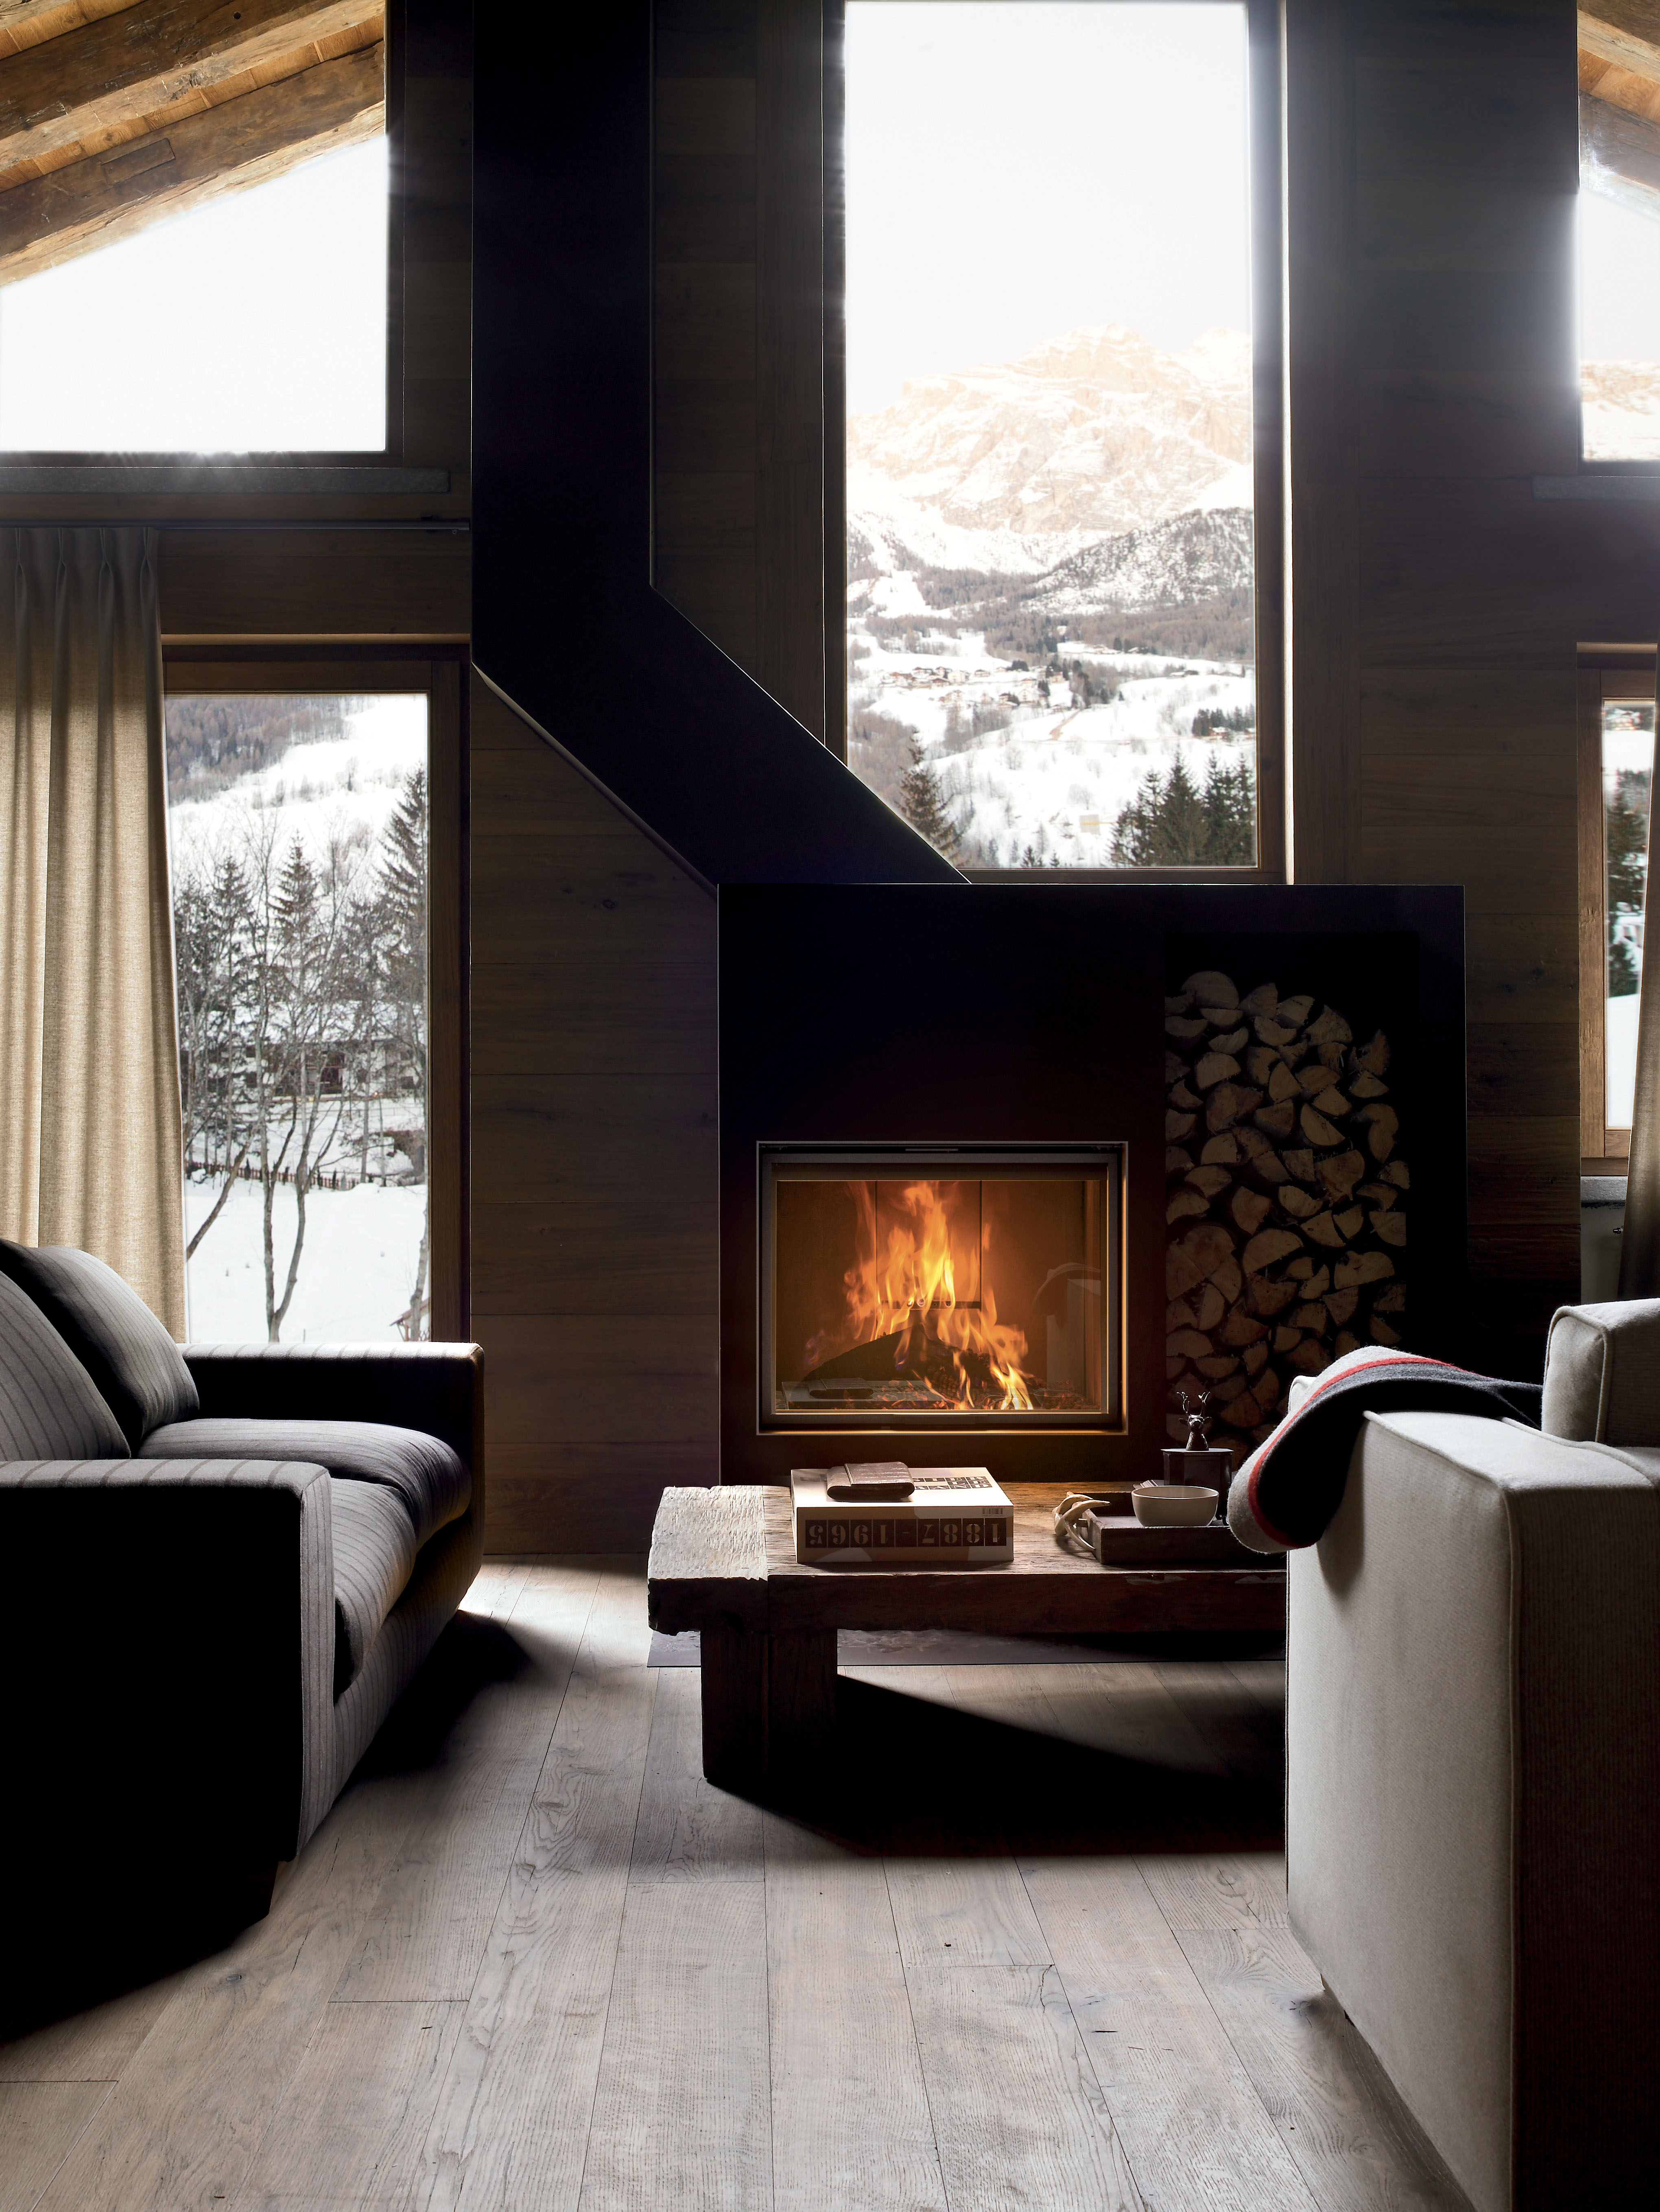 MCZ Wood Burning Fireplace in living room with wood stack and mountain scene outside